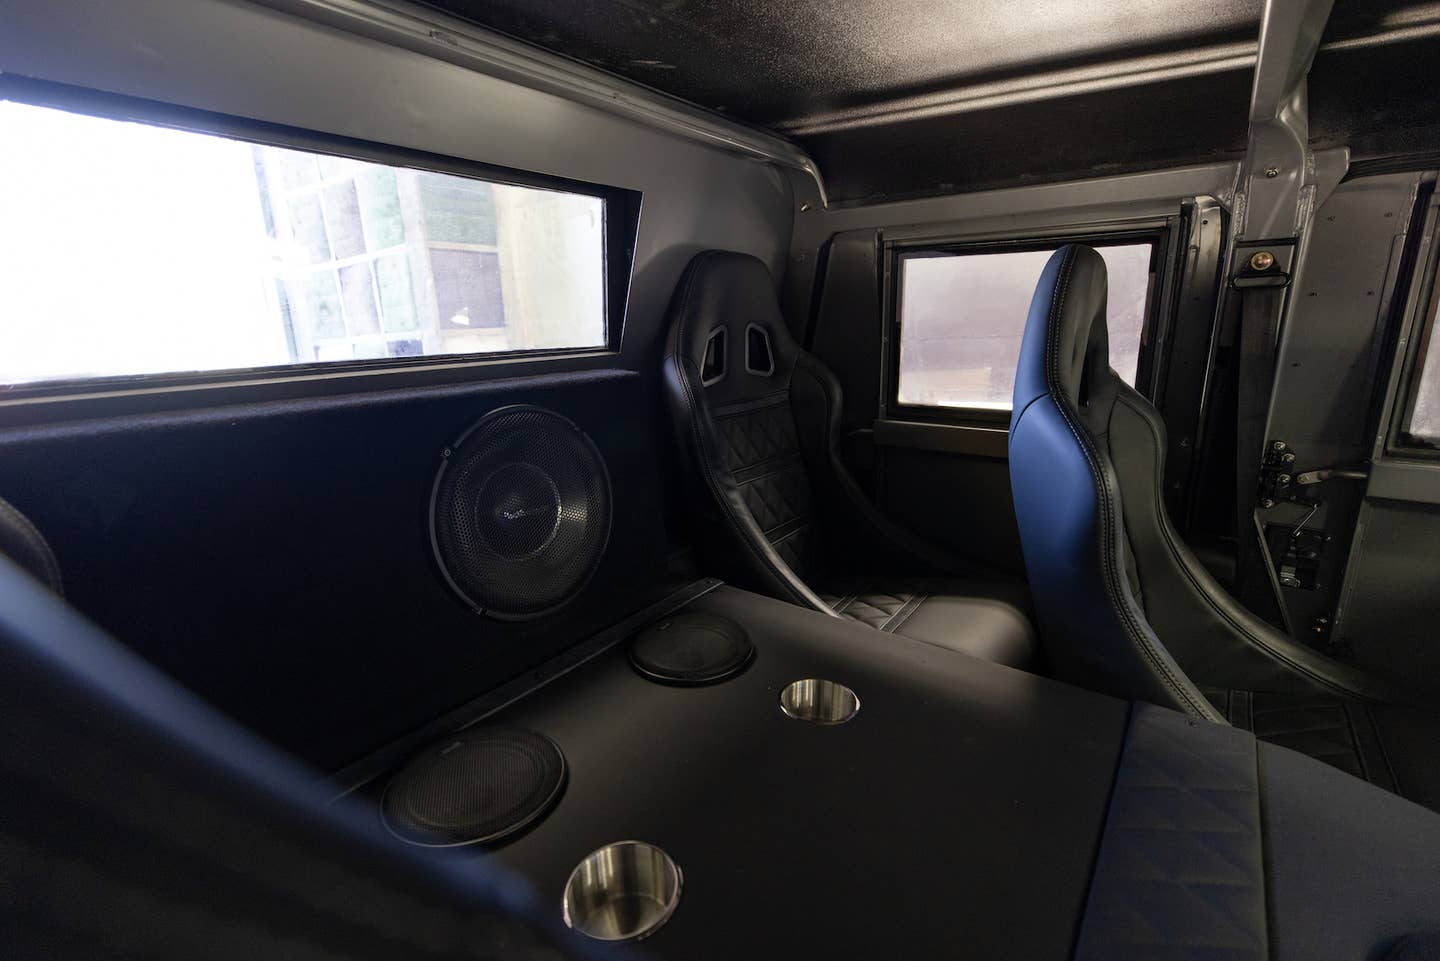 Back seat of the "Cyber-Hummer" H1 EV conversion